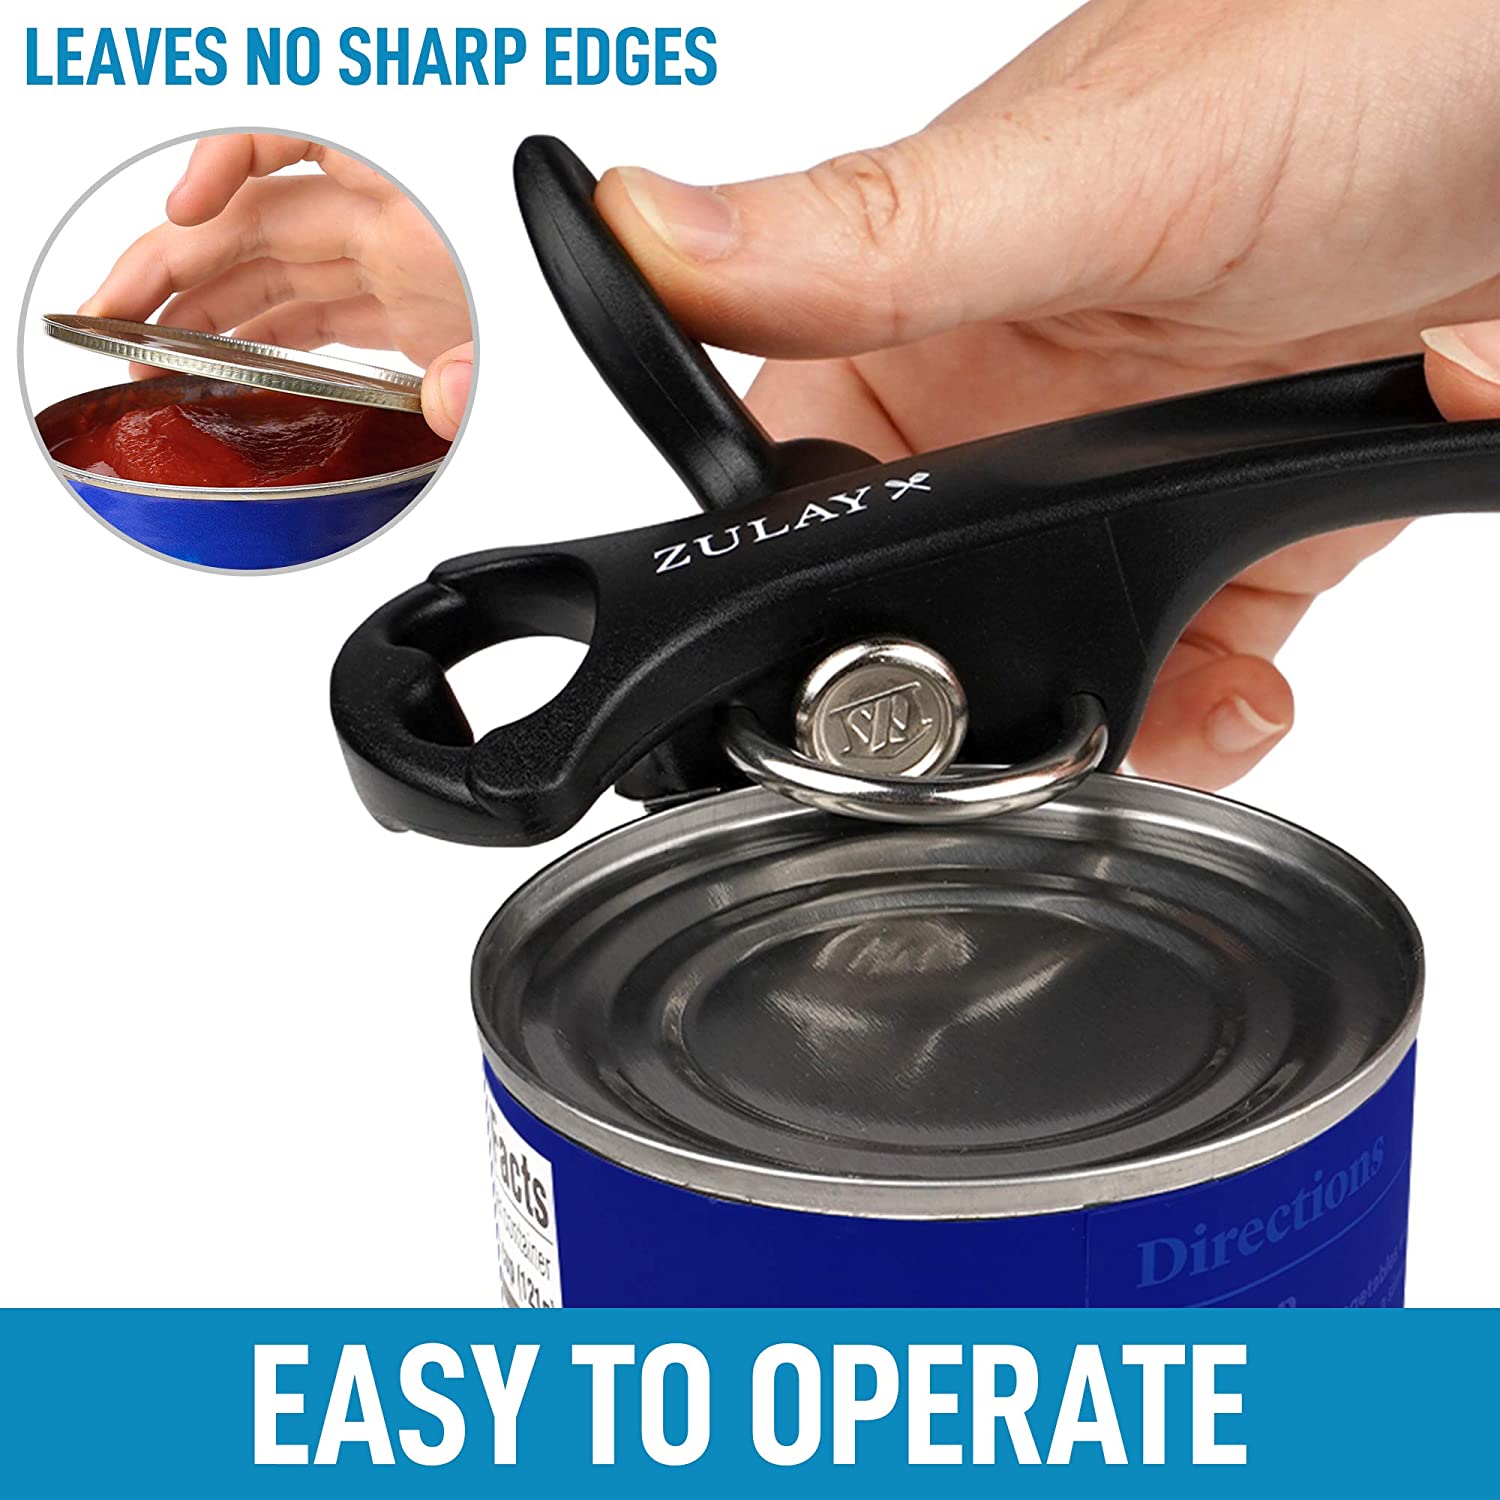 Smooth Edge Stainless Steel Can Opener - Zulay KitchenZulay Kitchen